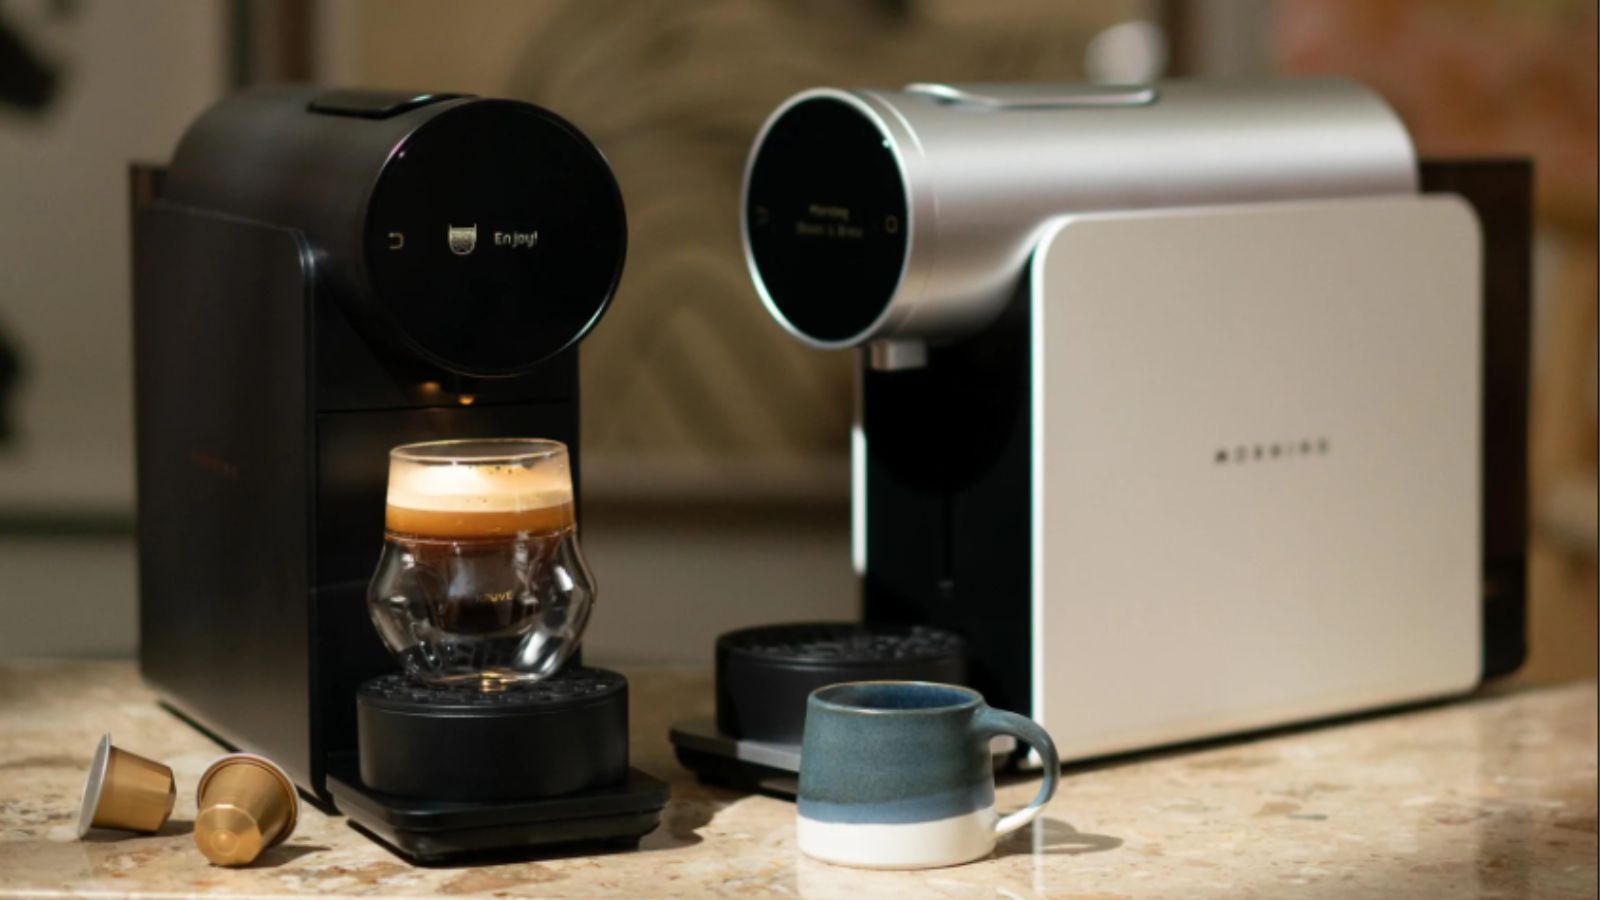 Unbox the NEW 2-in-1 Multi-Function Coffee Maker